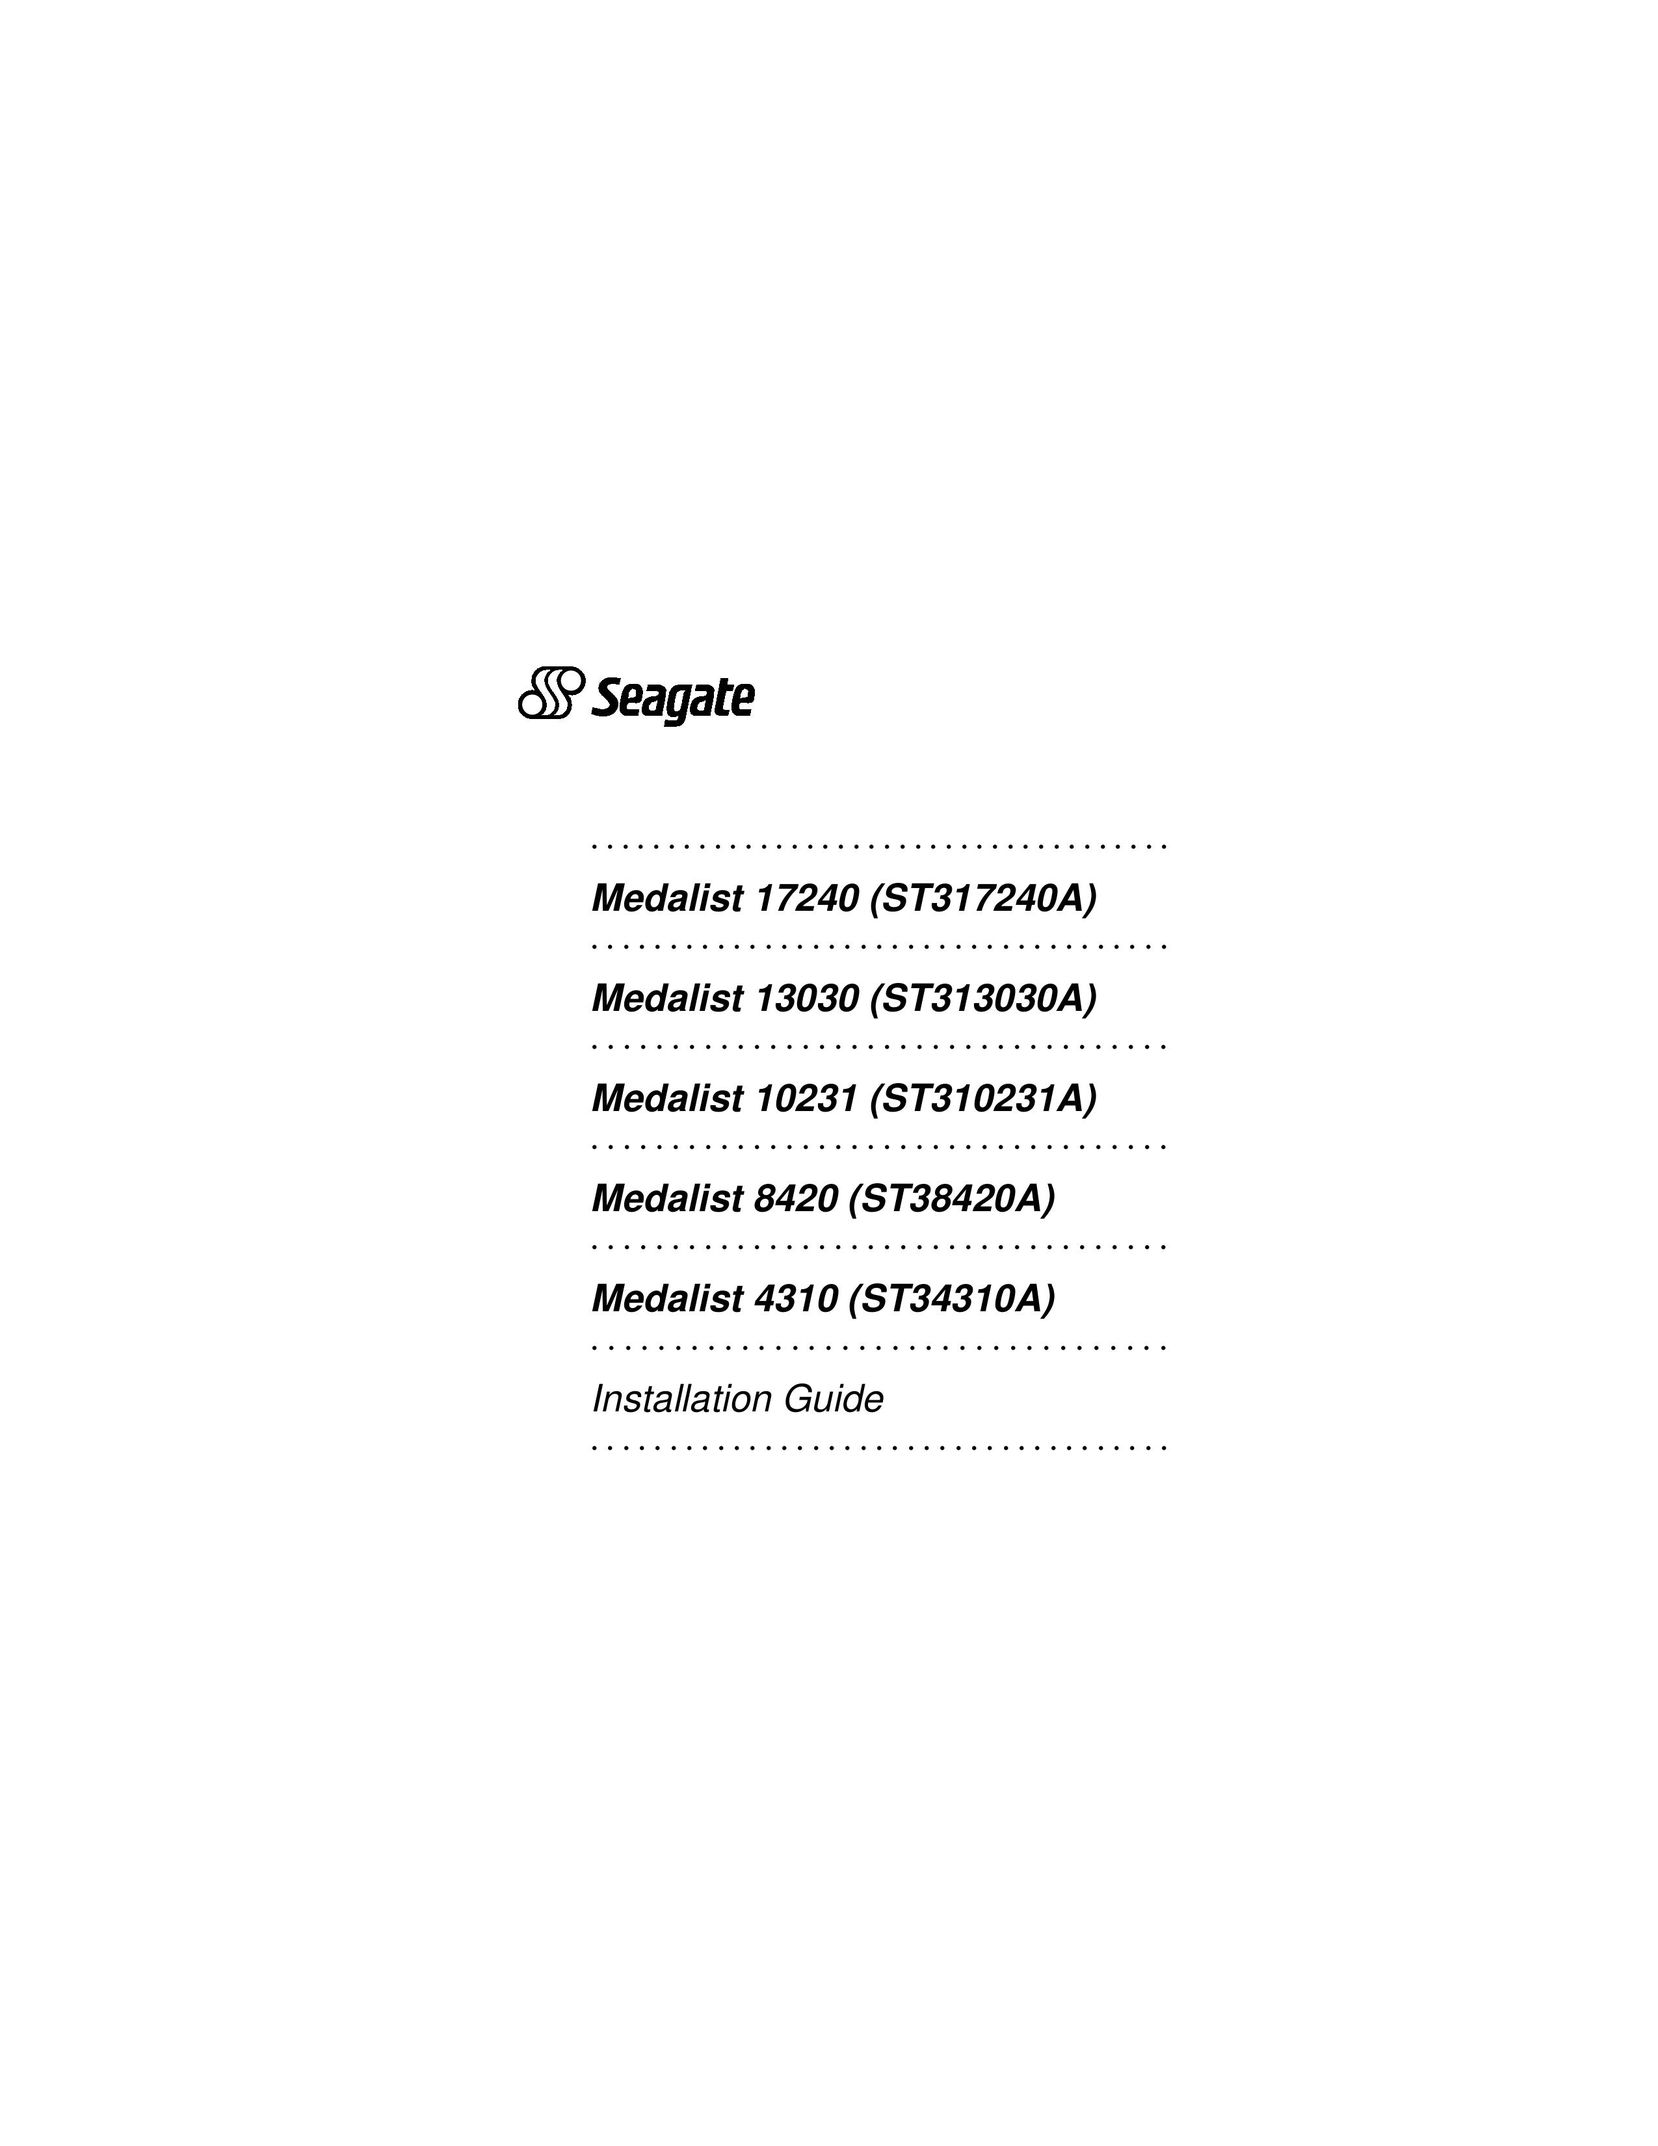 Seagate ST313030A Two-Way Radio User Manual